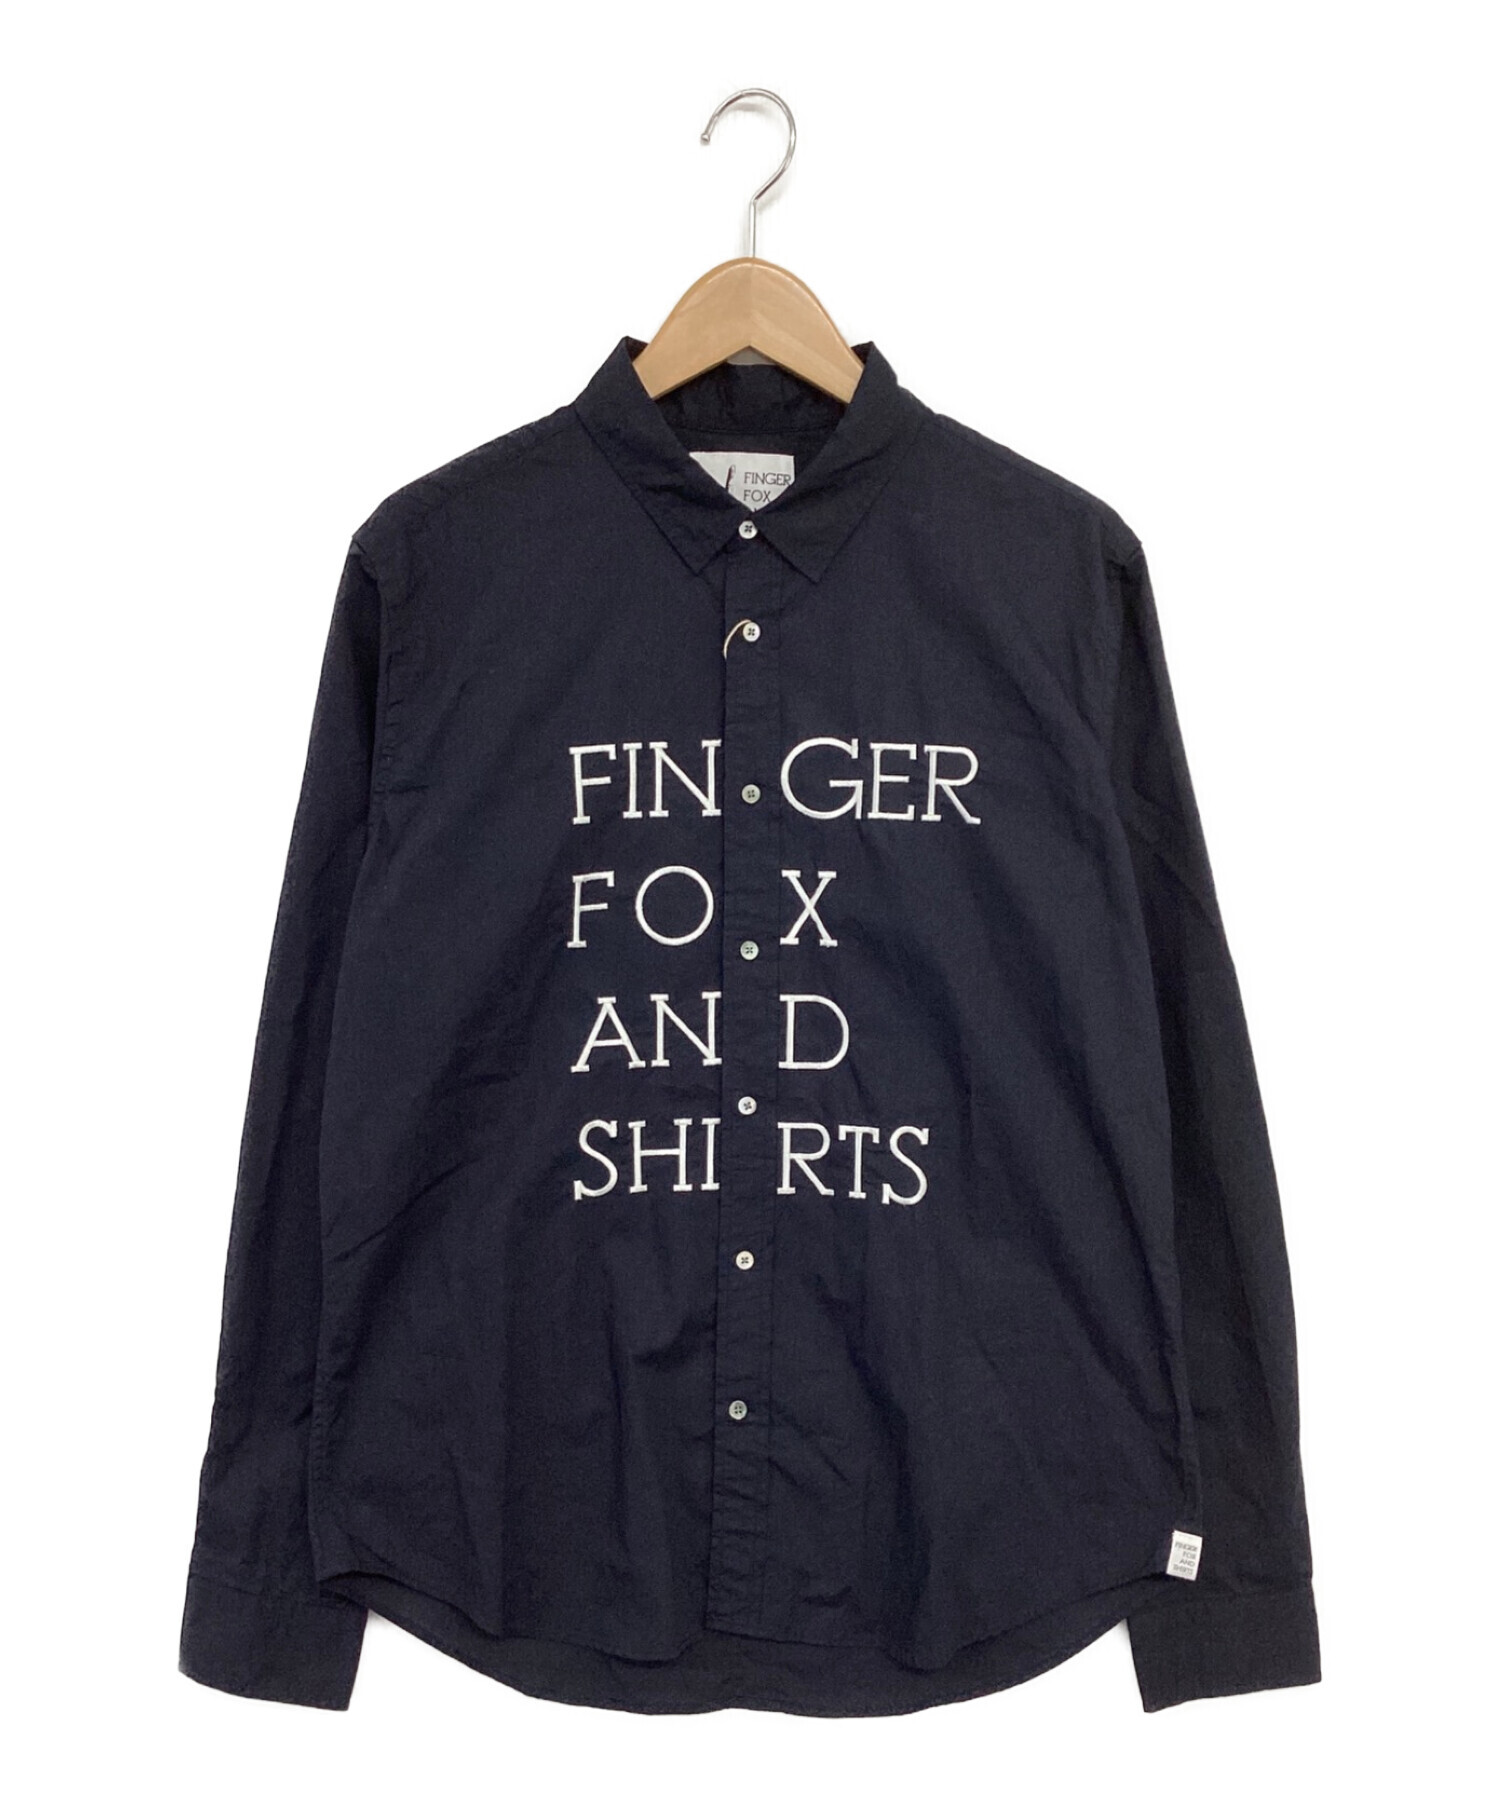 FINGER FOX AND SHIRTS（フィンガーフォックスアンドシャツ）… - その他